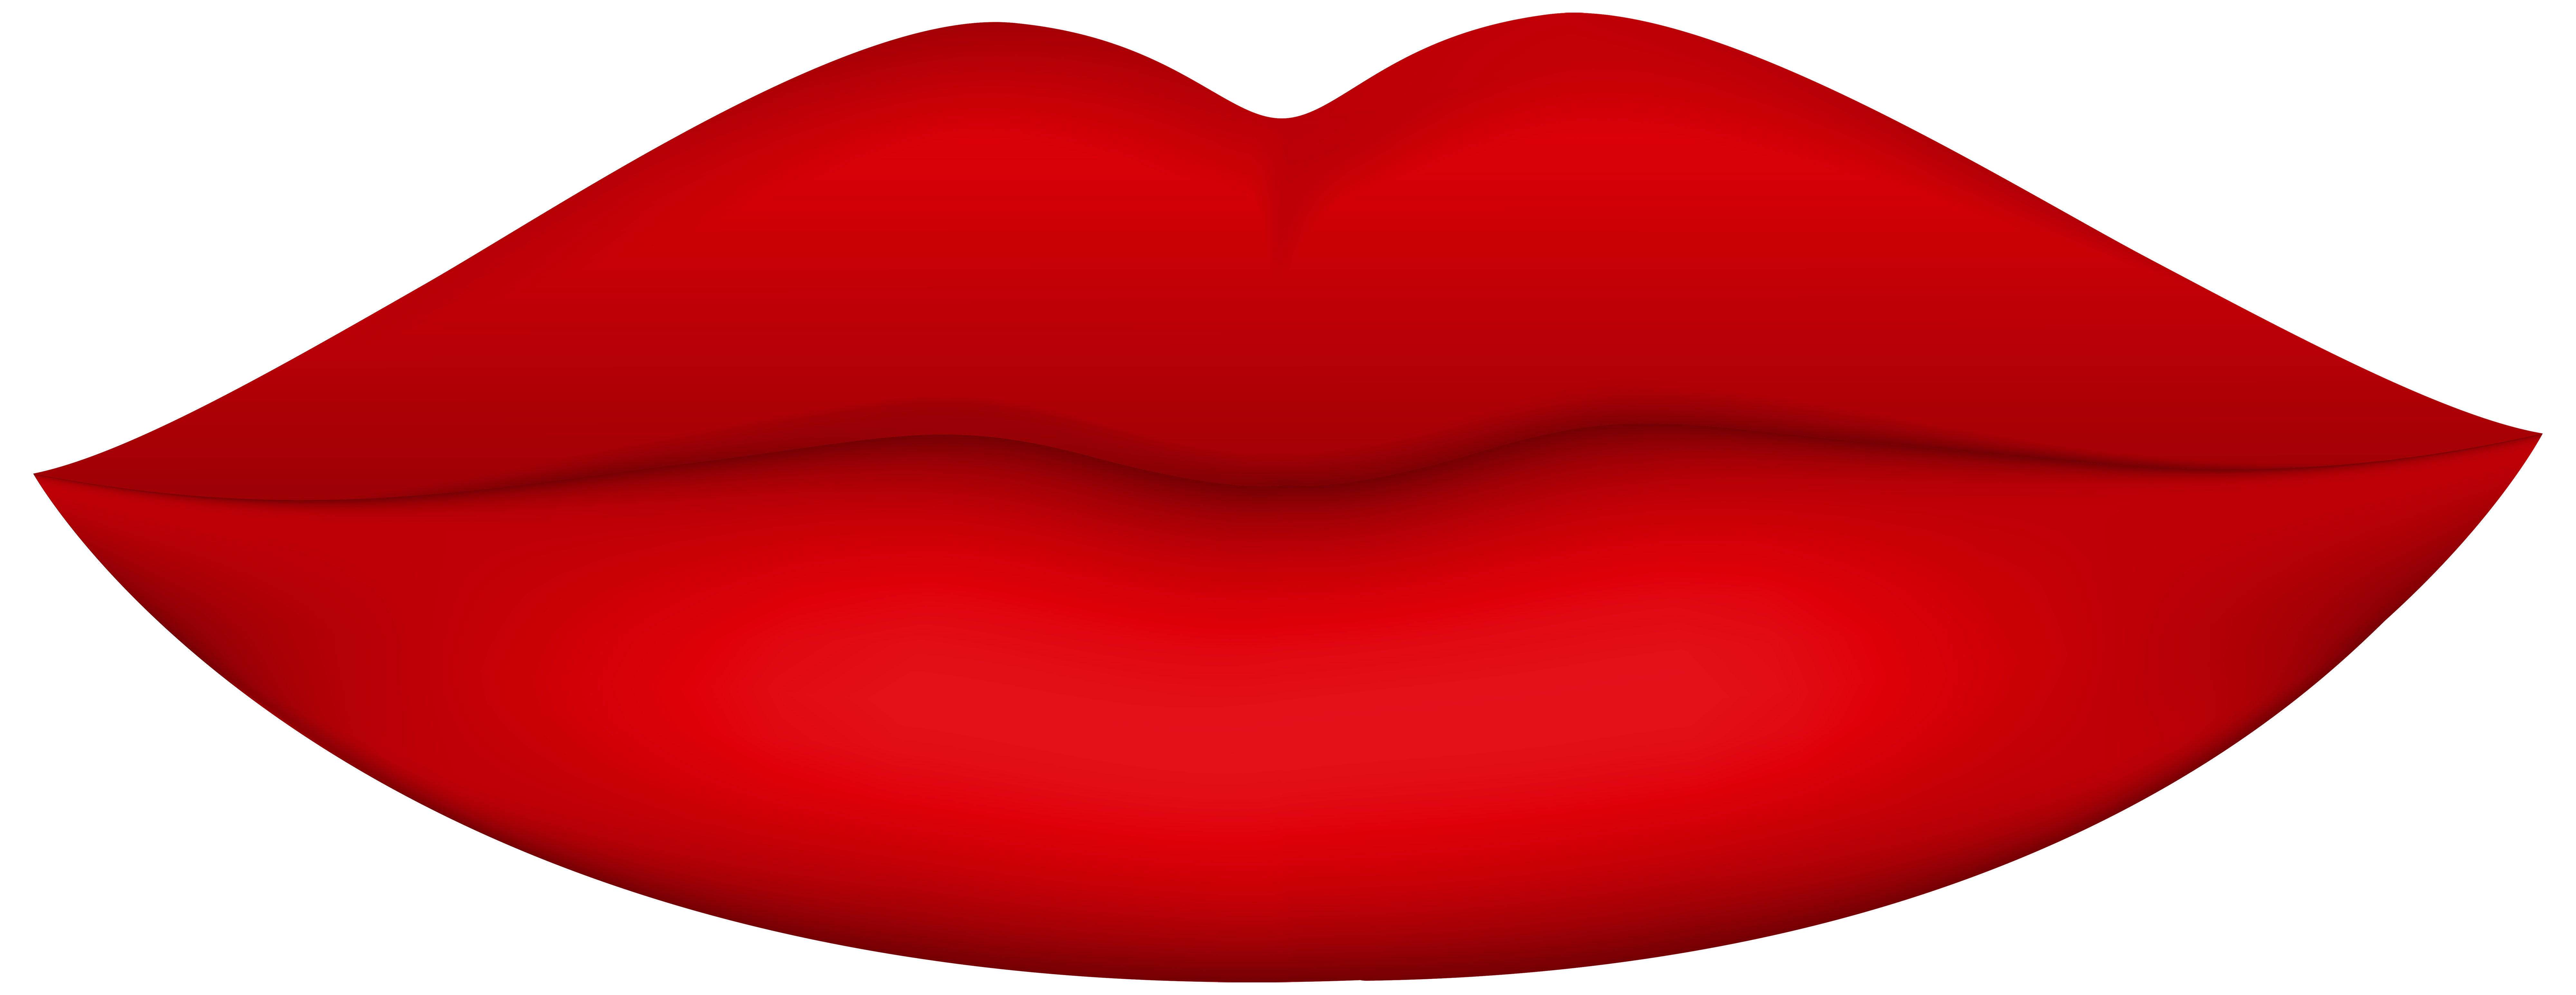 lips pictures clip art - photo #29